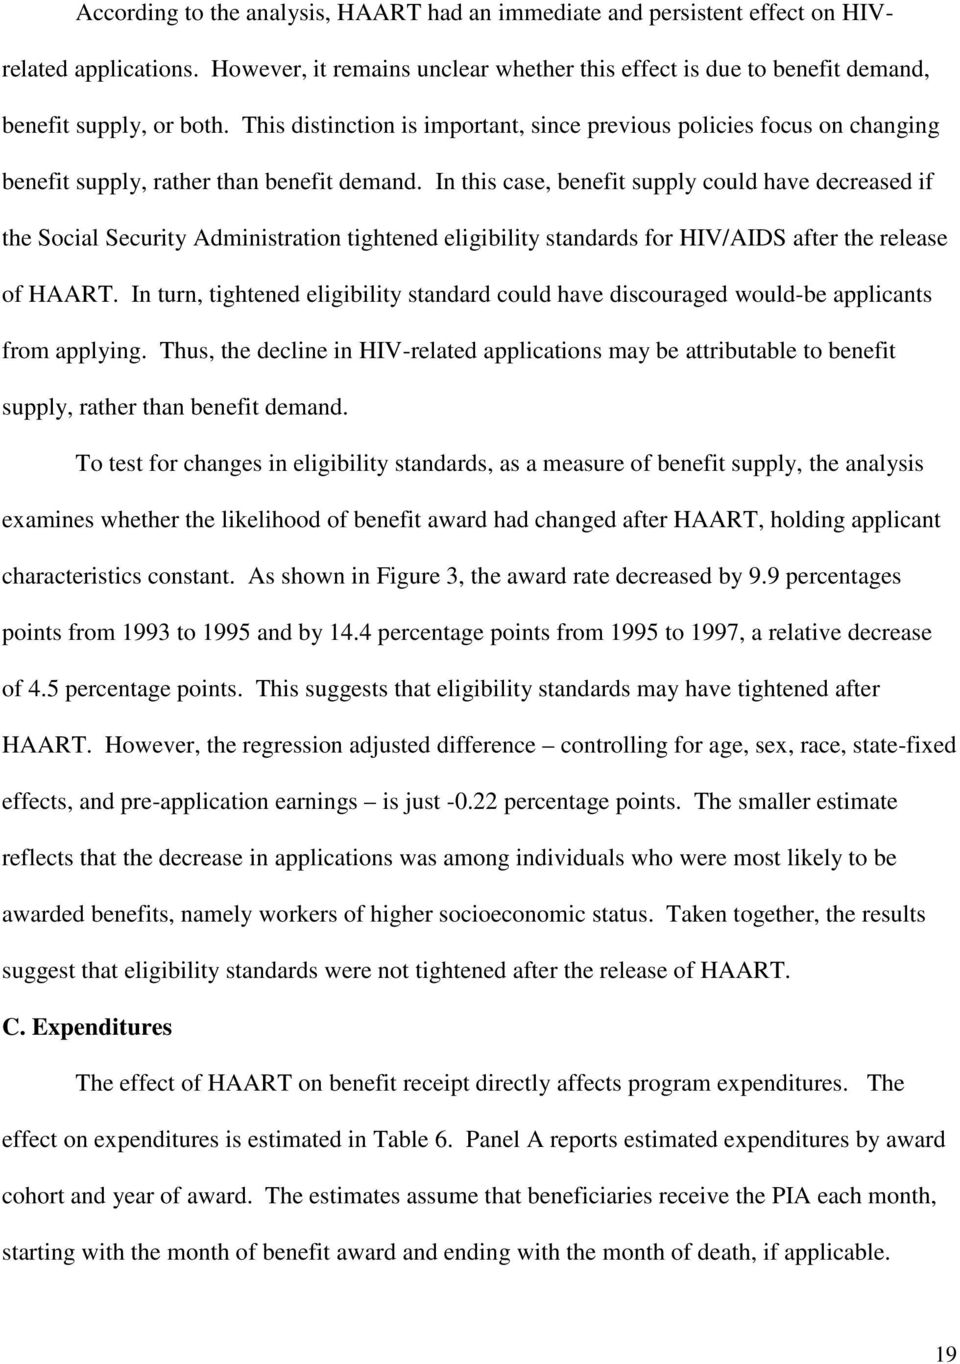 In this case, benefit supply could have decreased if the Social Security Administration tightened eligibility standards for HIV/AIDS after the release of HAART.